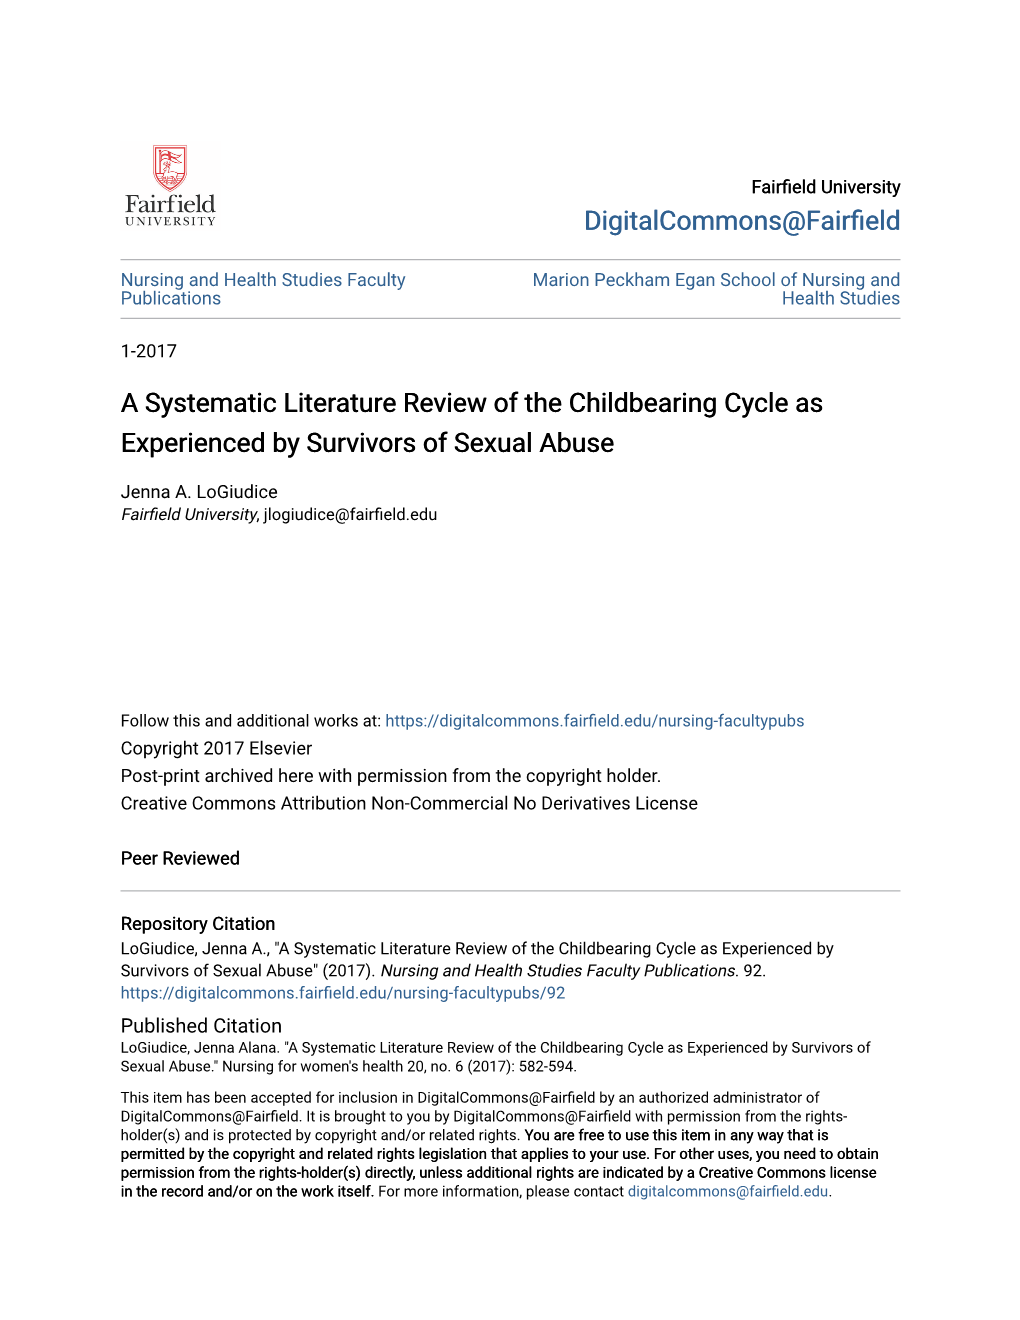 A Systematic Literature Review of the Childbearing Cycle As Experienced by Survivors of Sexual Abuse